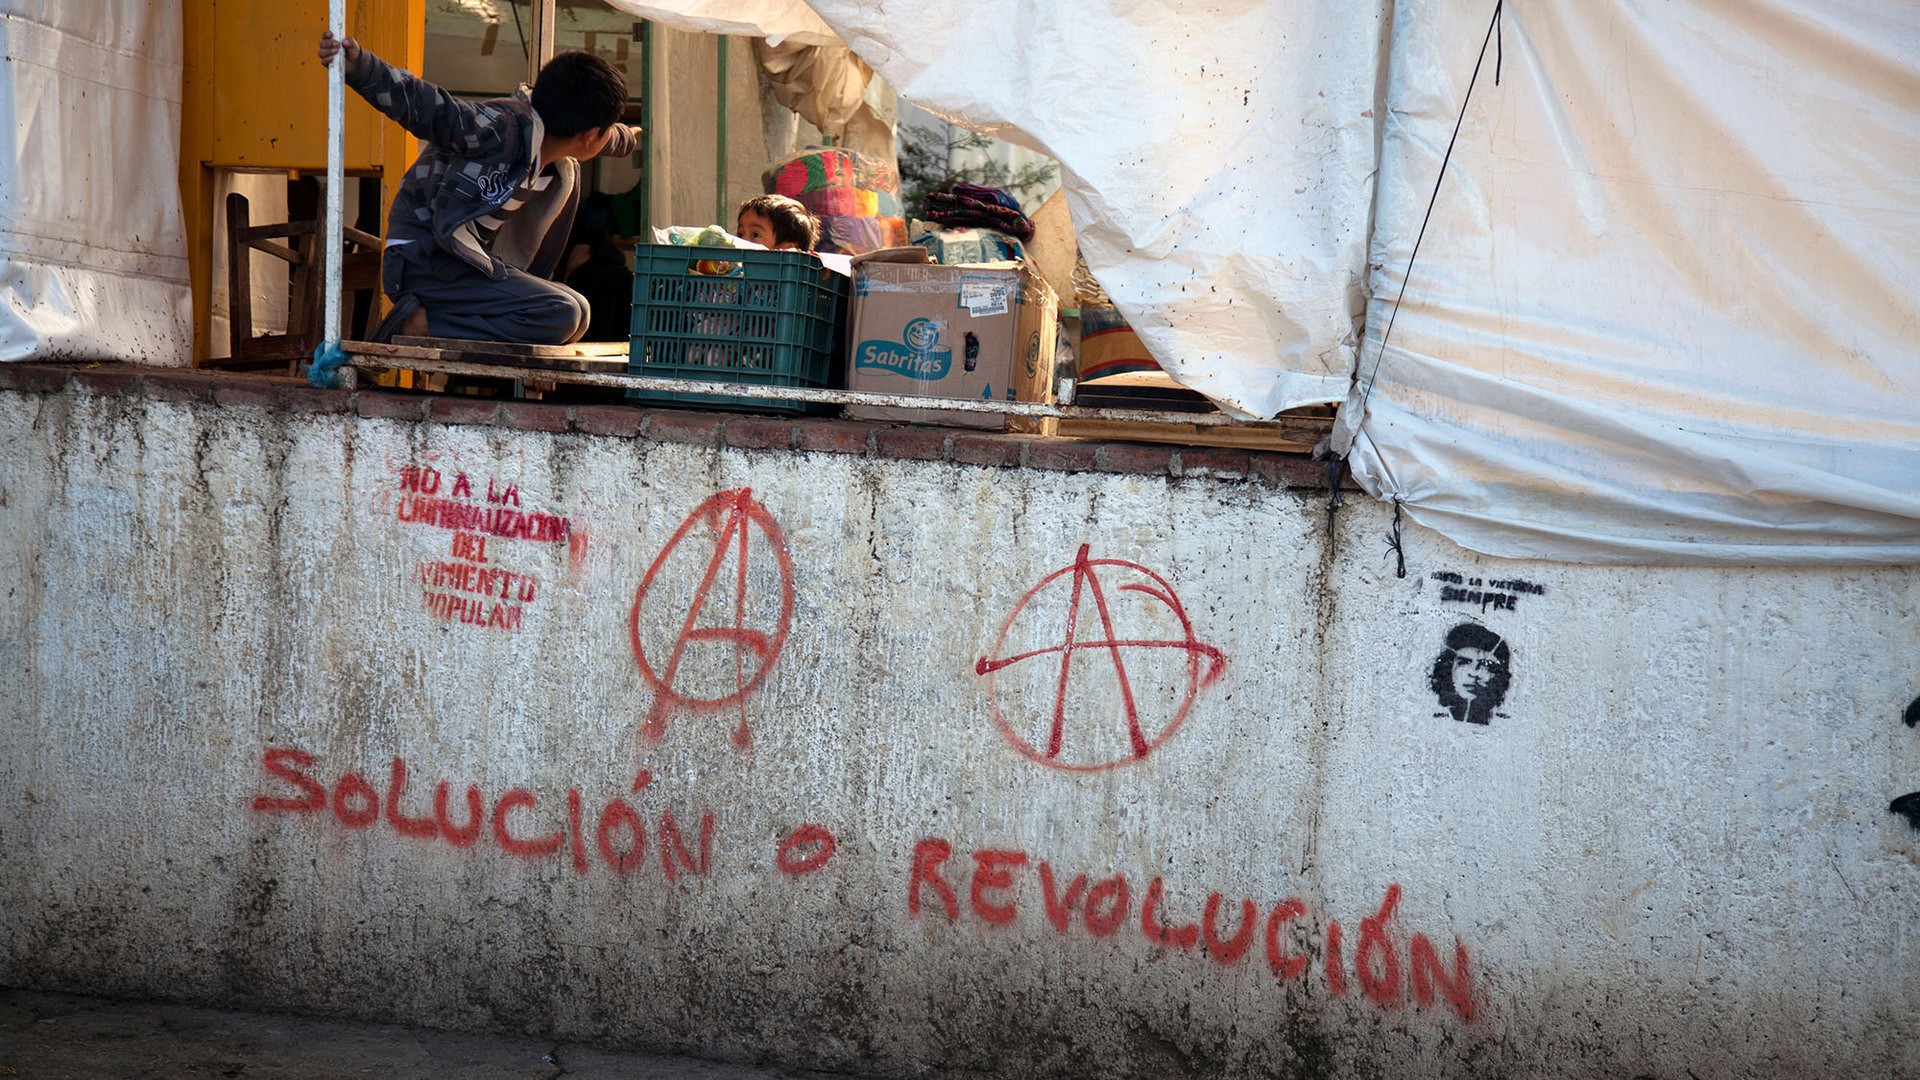 Children play at a market in San Cristóbal de las Casas, where the Zapatistas staged an armed revolution 20 years ago. Grafitti sprayed onto the city's walls shows the contemporary influence of the leftist movement. (Photo by Rachel Leingang.)